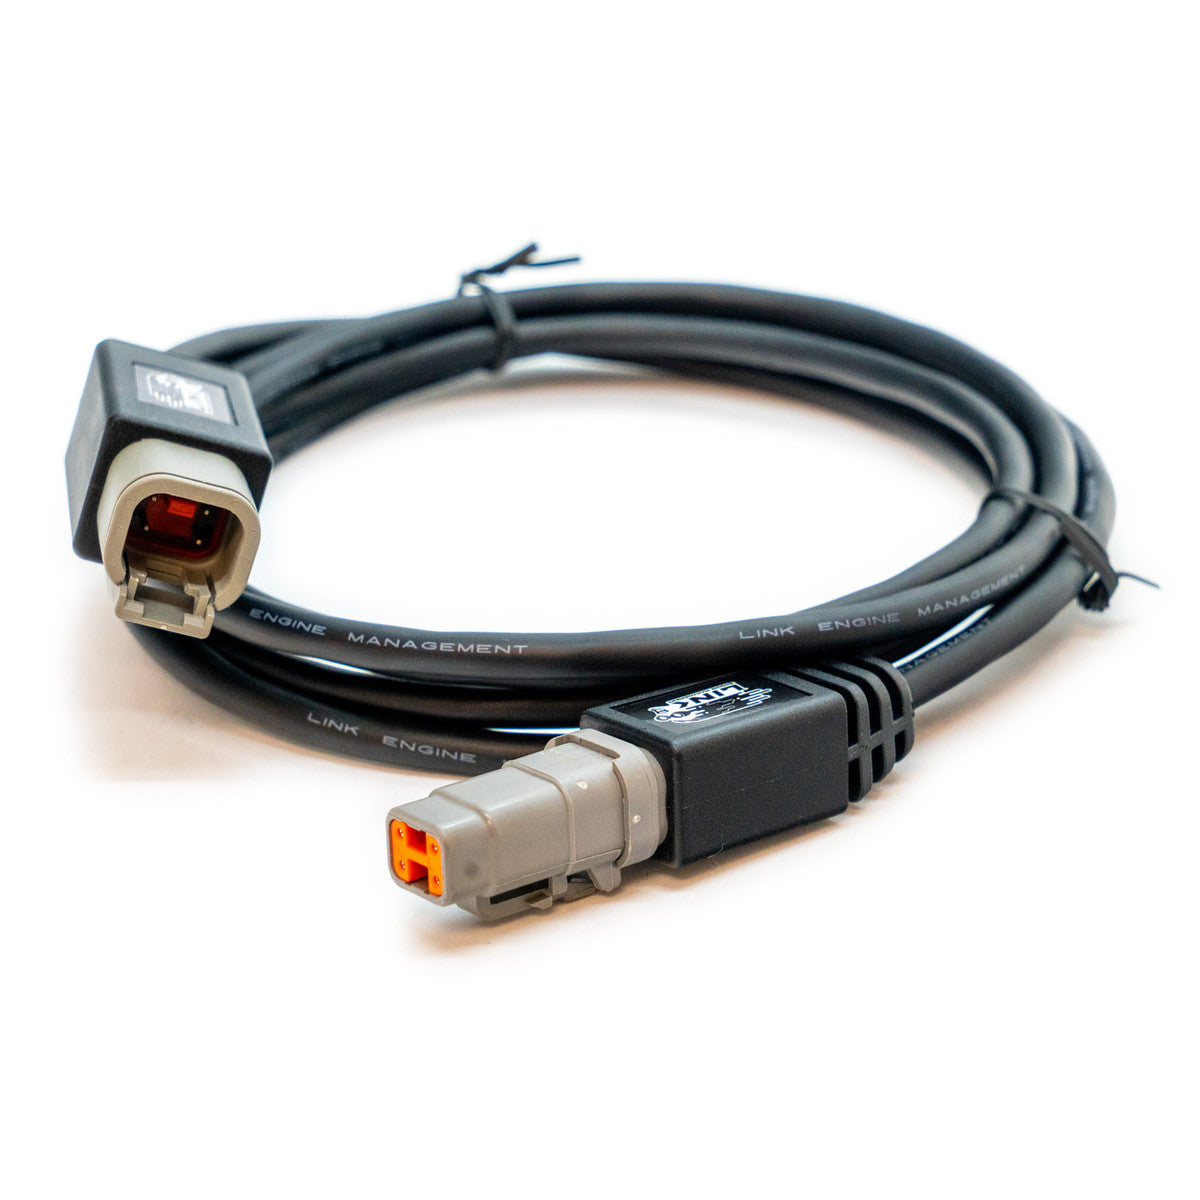 Link ECU CANEXT - CAN Extension Cable 2m